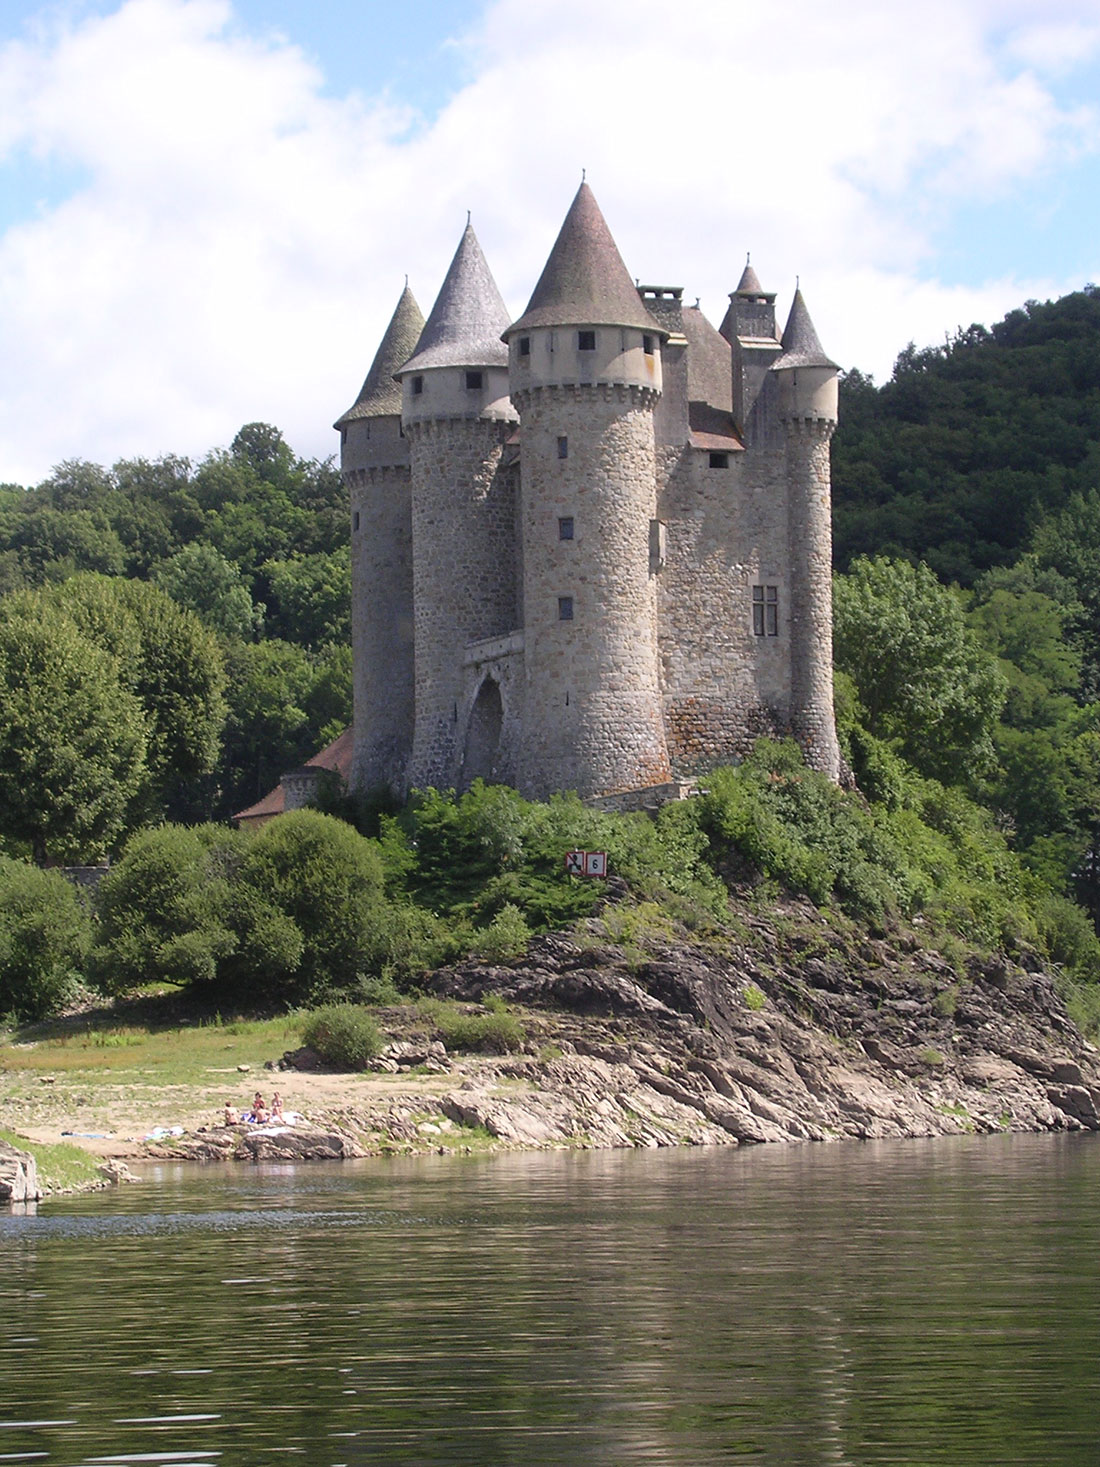 View of the Château de Val from the water